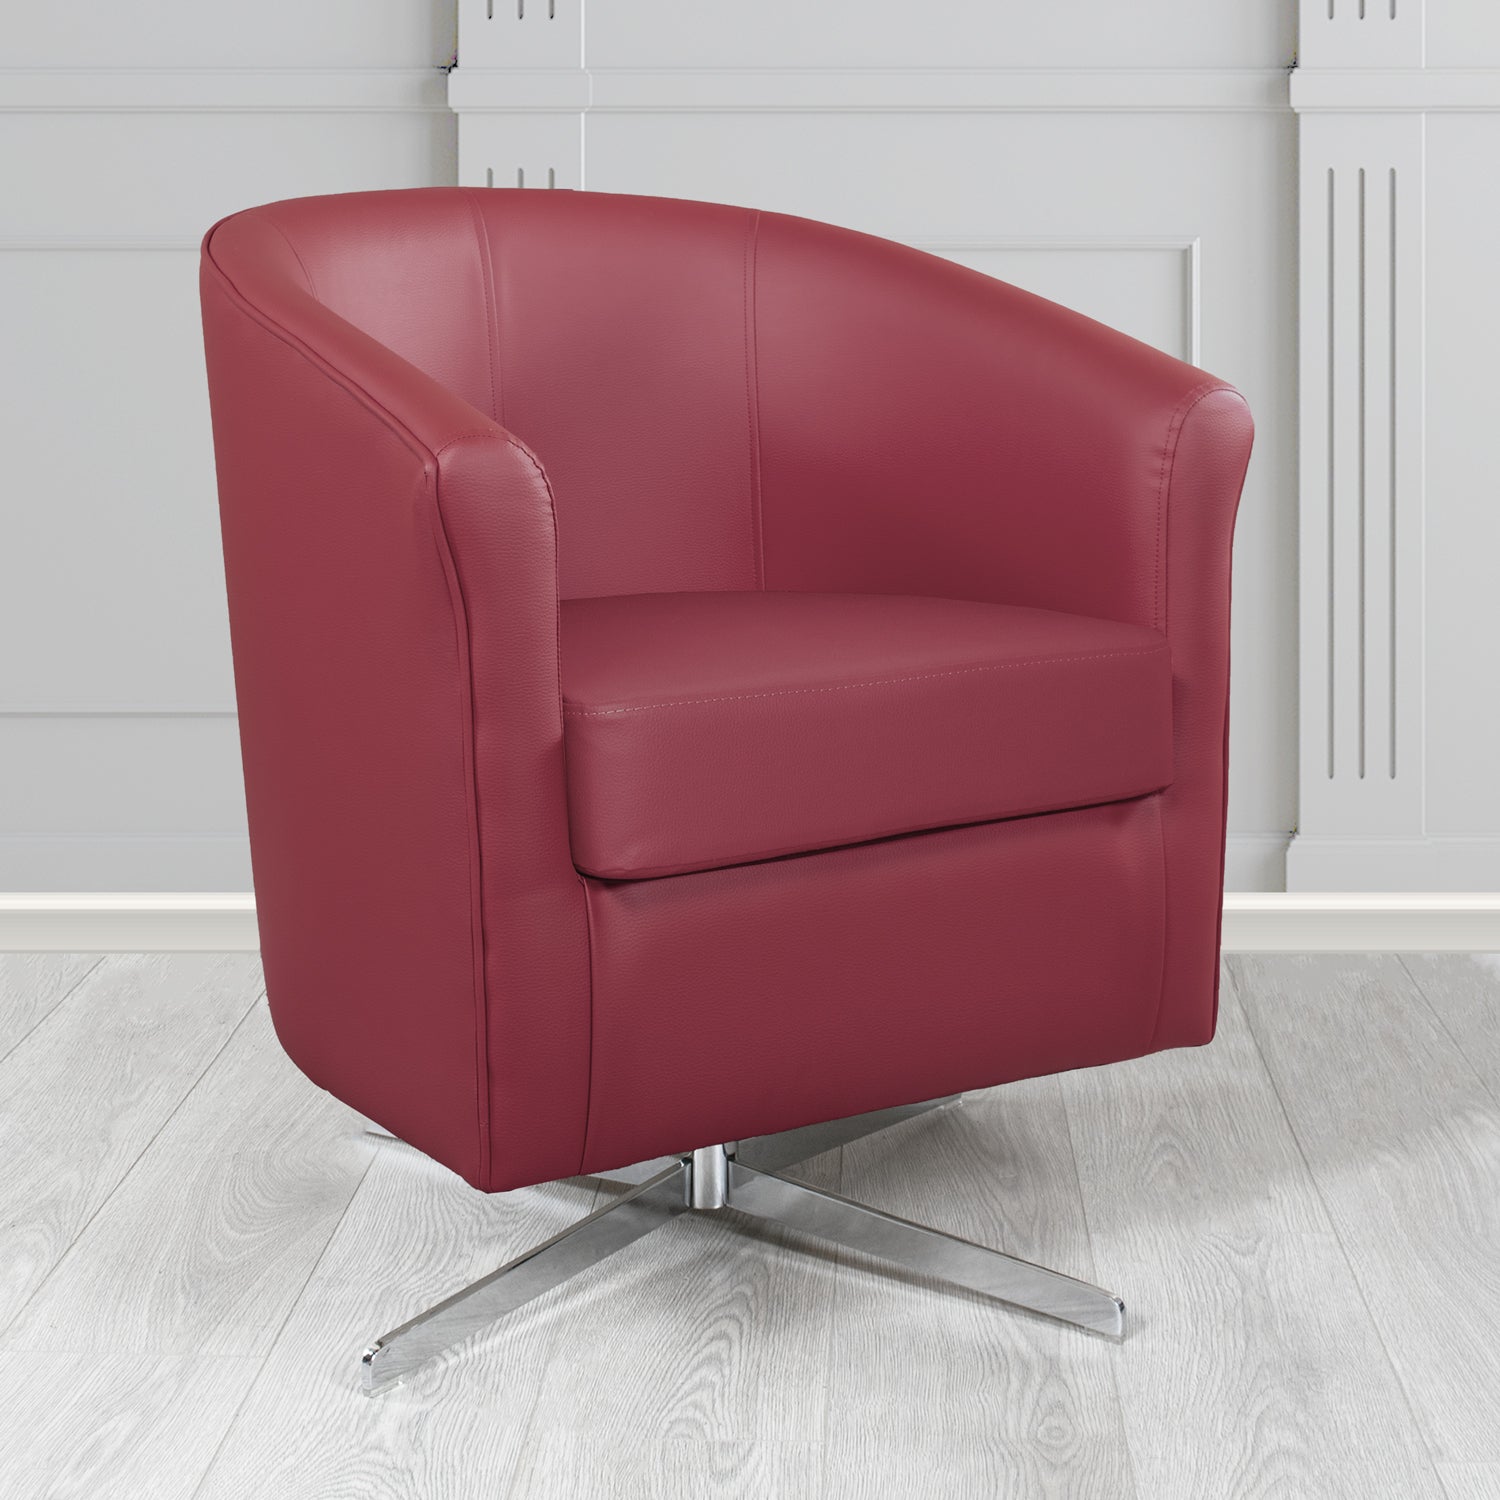 Cannes Swivel Tub Chair in Just Colour Jazzberry Crib 5 Faux Leather - The Tub Chair Shop